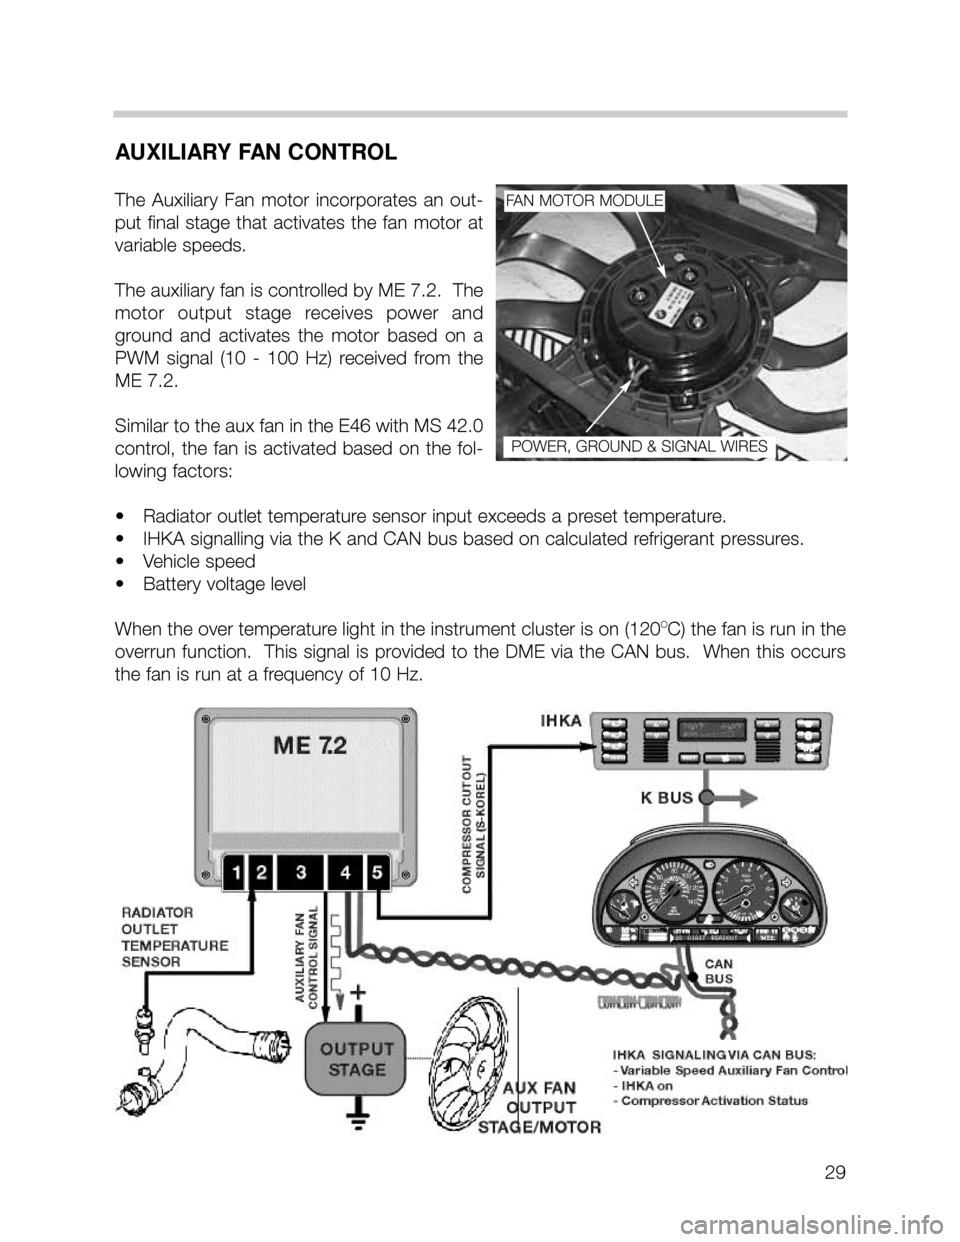 BMW 740i 2001 E38 M62TU Engine Owners Manual 29
AUXILIARY FAN CONTROL
The  Auxiliary  Fan  motor  incorporates  an  out-
put  final  stage  that  activates  the  fan  motor  at
variable speeds.  
The auxiliary fan is controlled by ME 7.2.  The
m